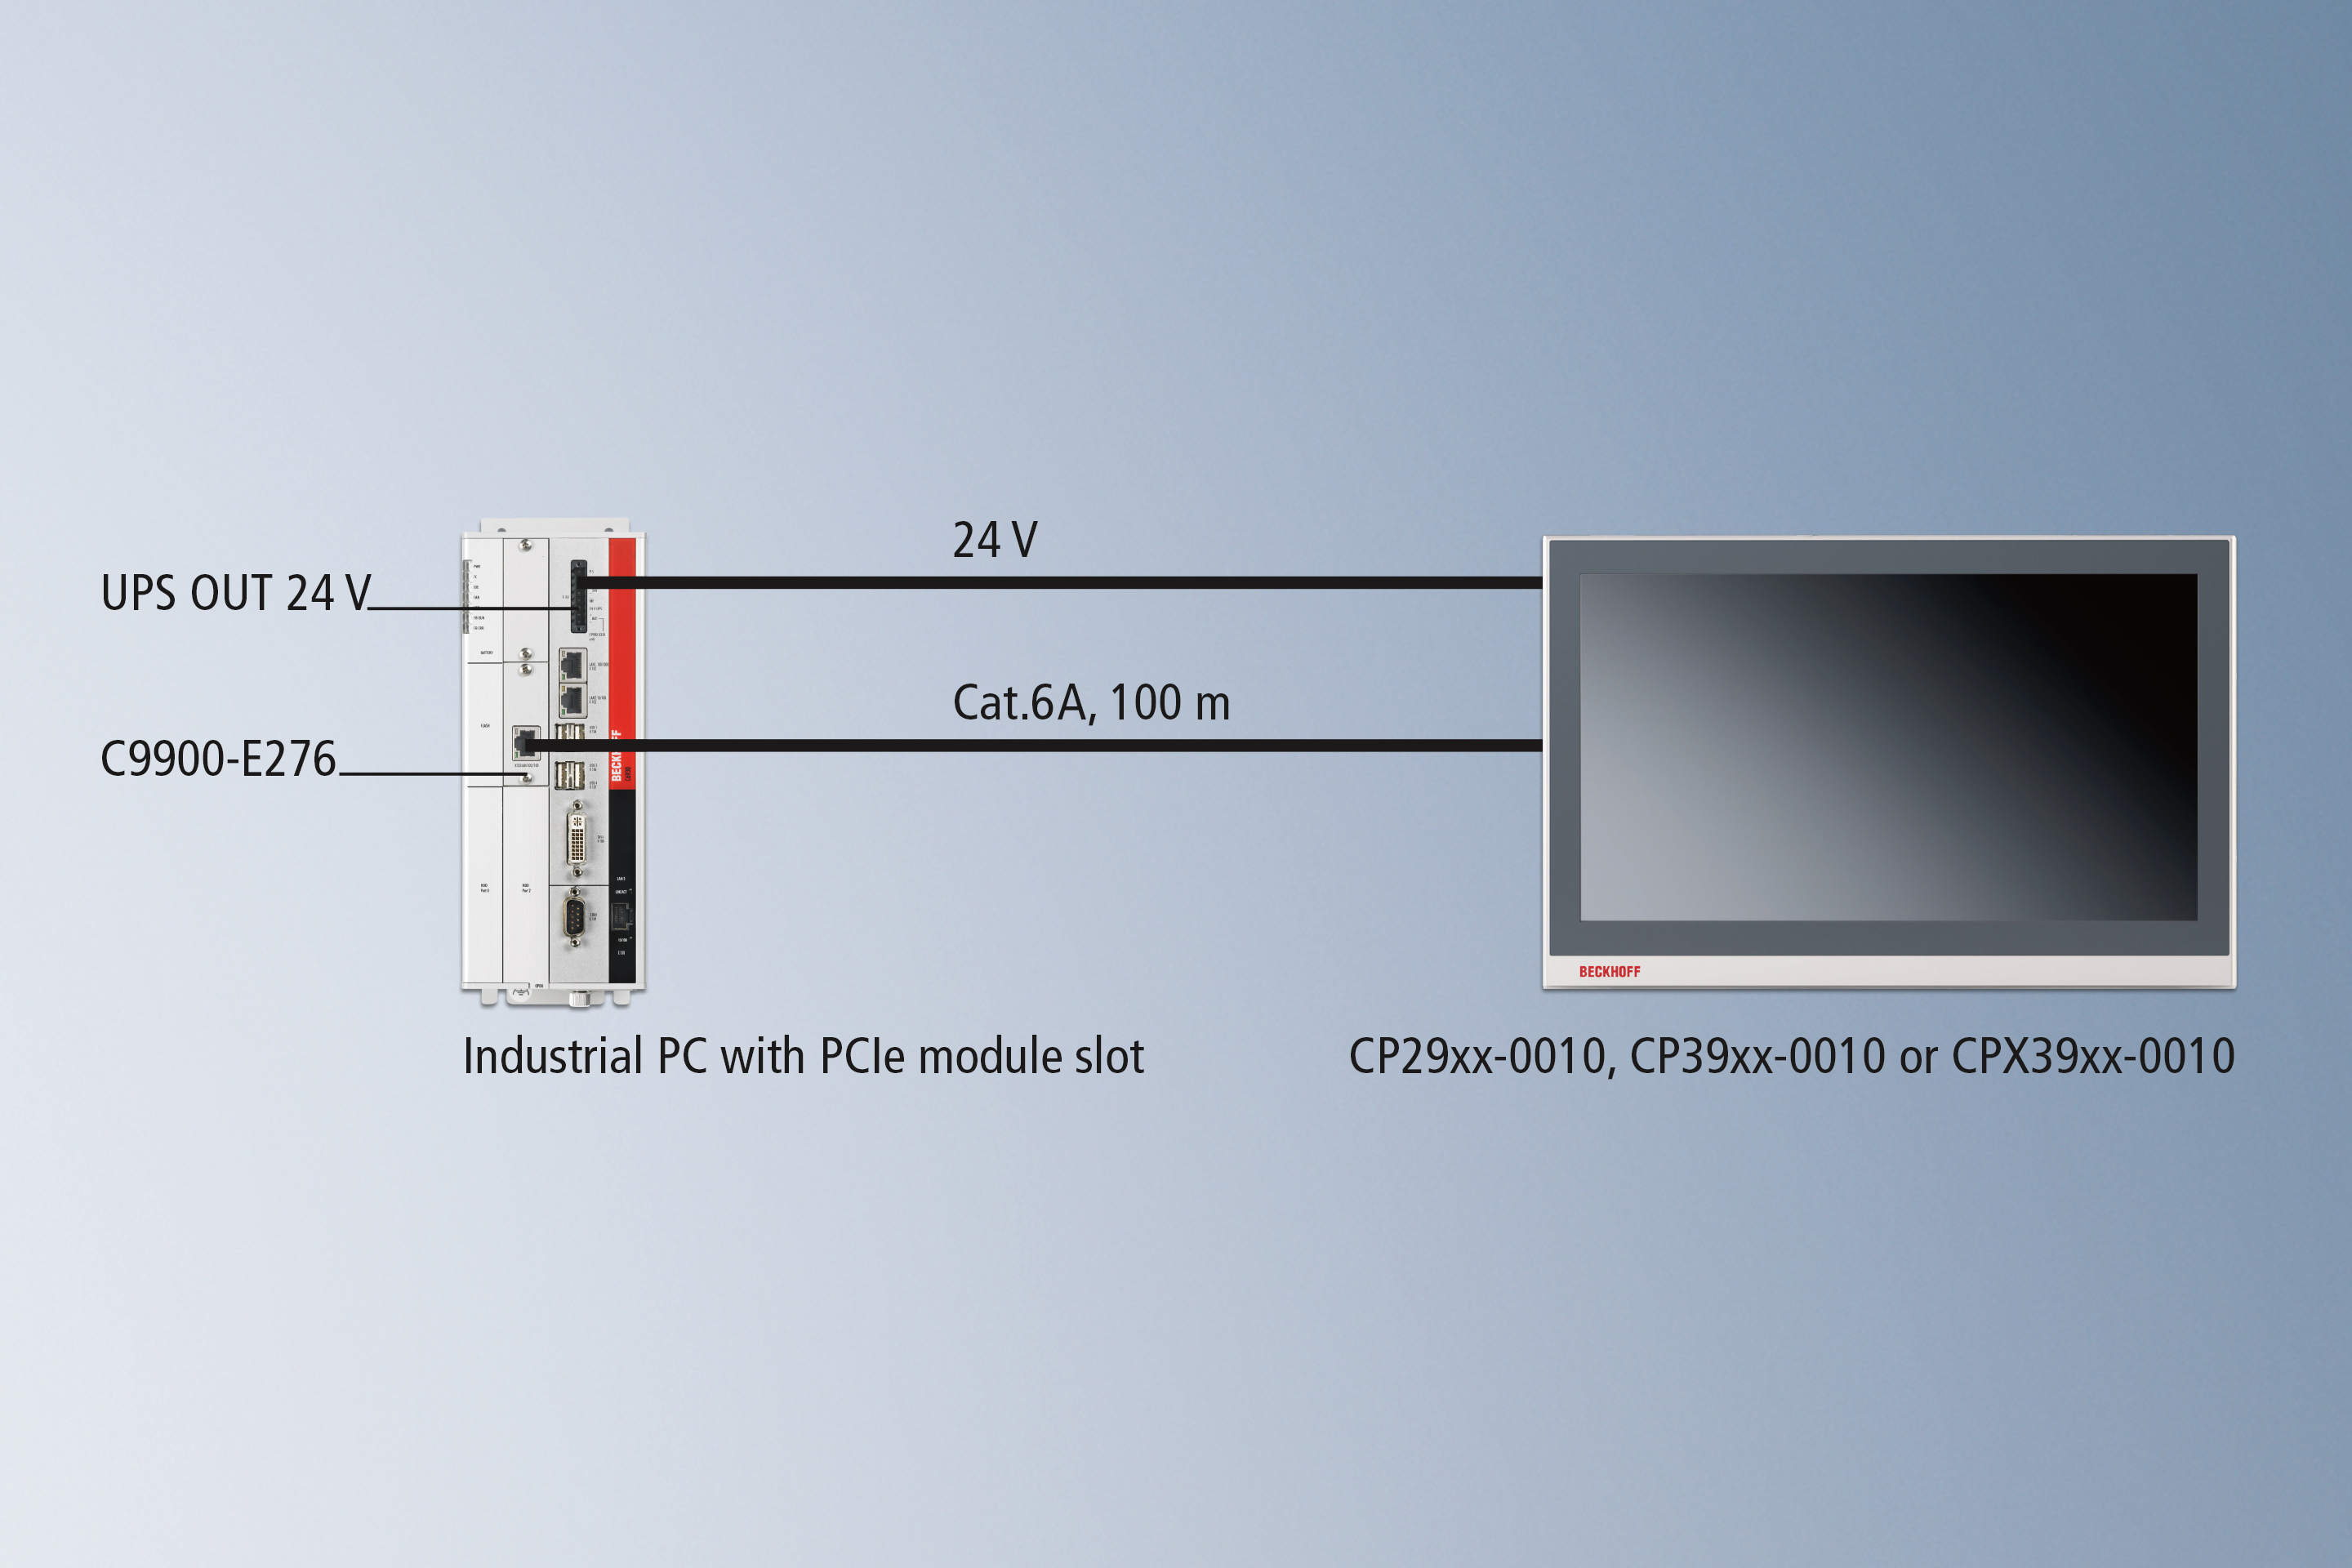 CP-Link 4 – The Two Cable Display Link: via C9900-E276 PCIe module integrated in the PC